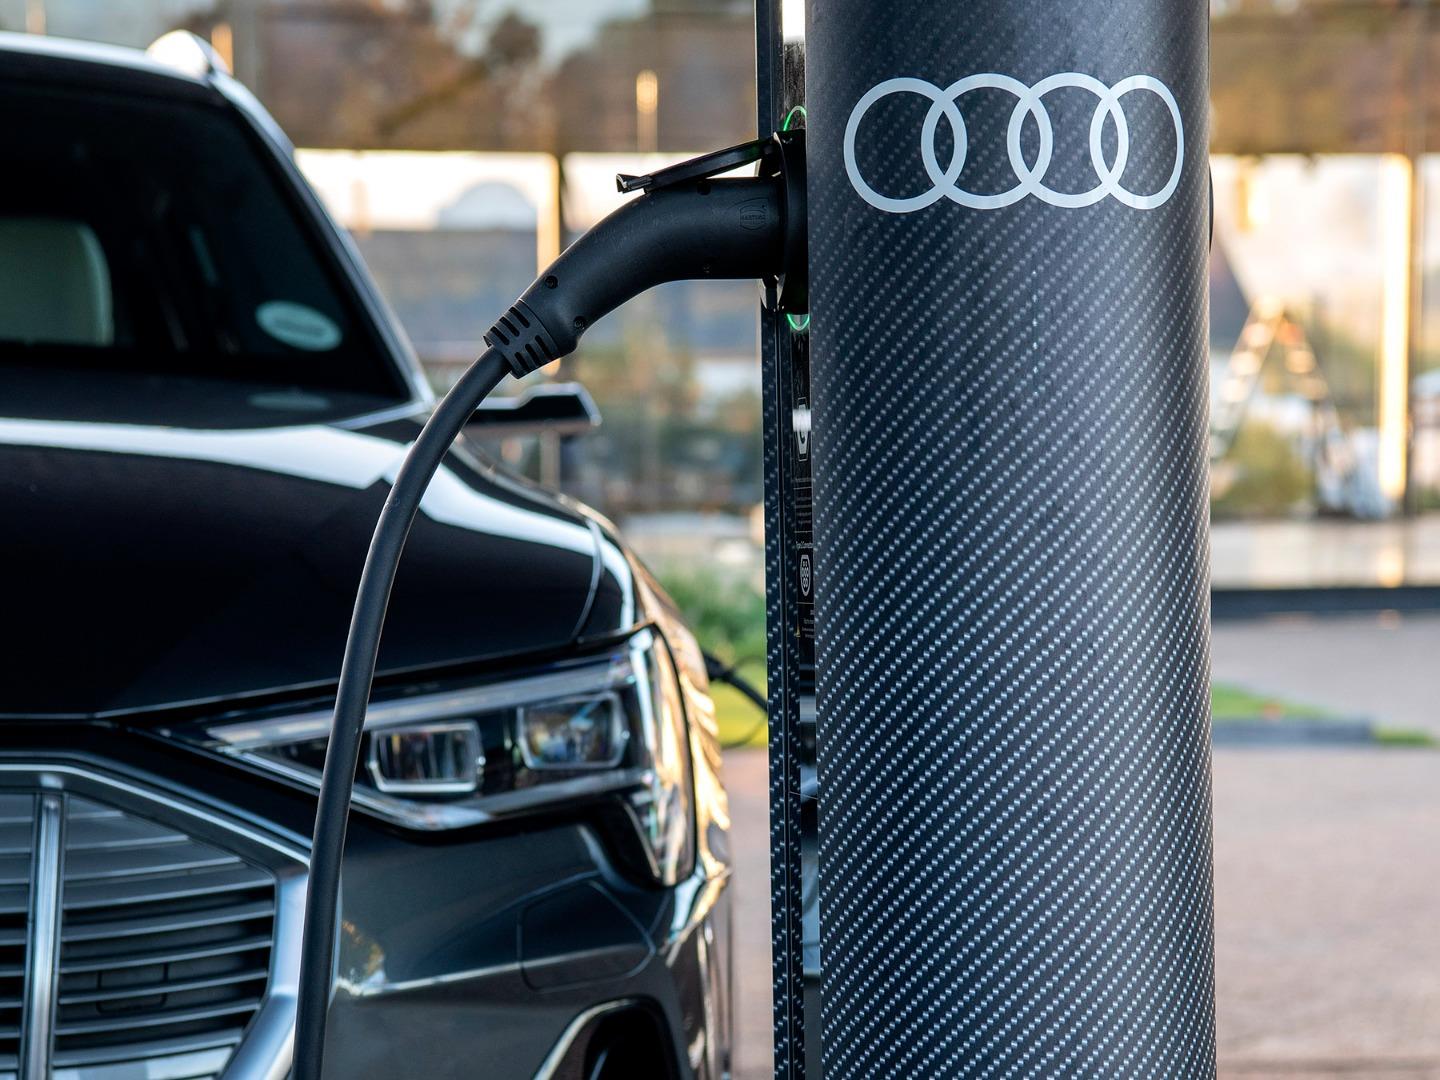 where are electric car charging stations near me?